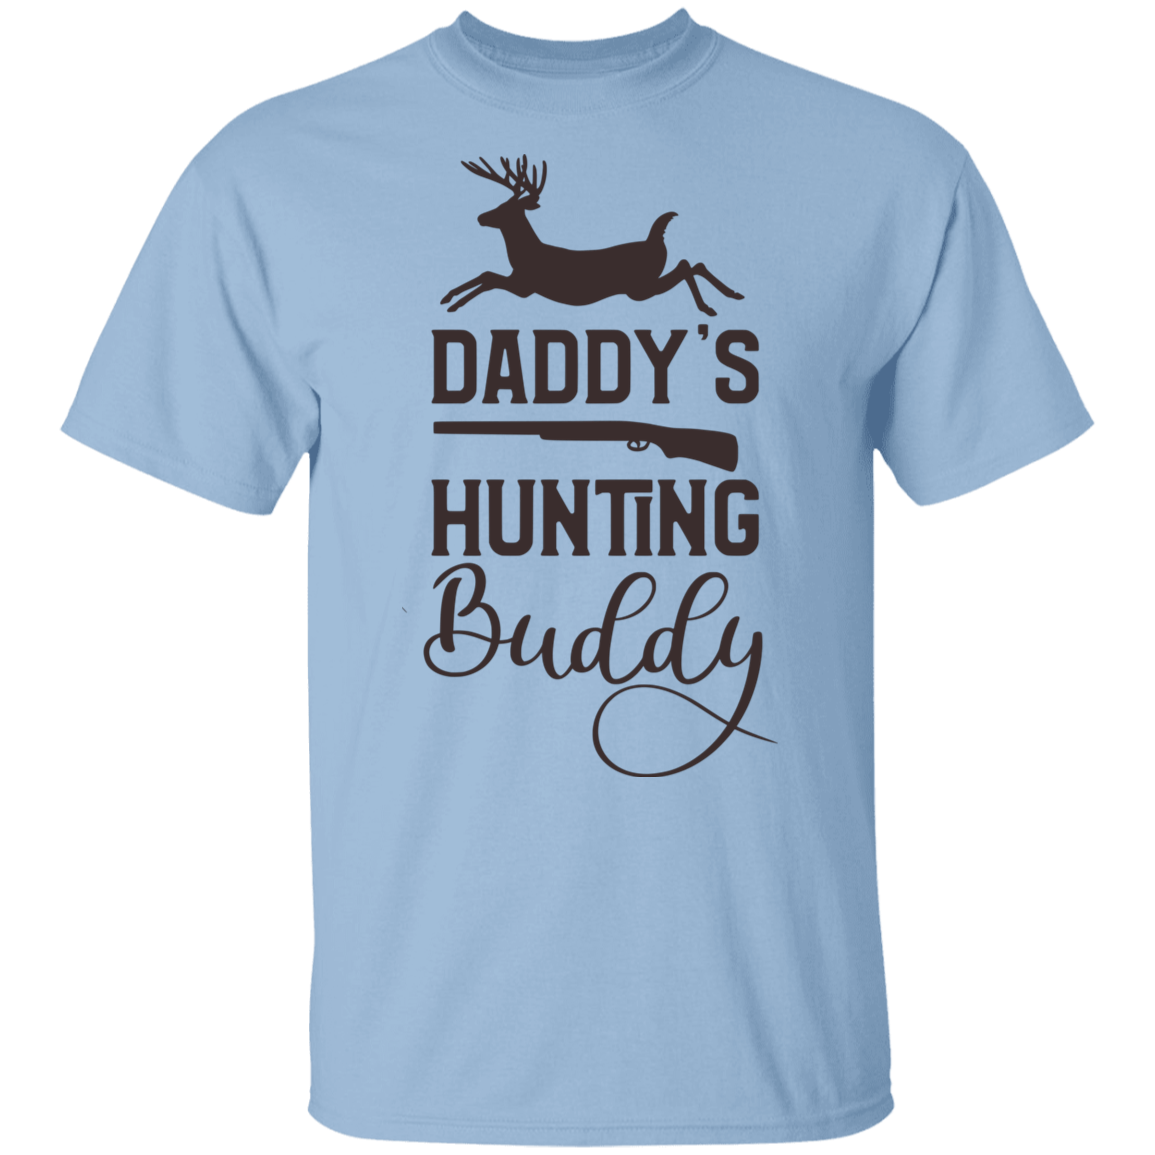 Daddy's hunting buddy youth Cotton T-Shirt